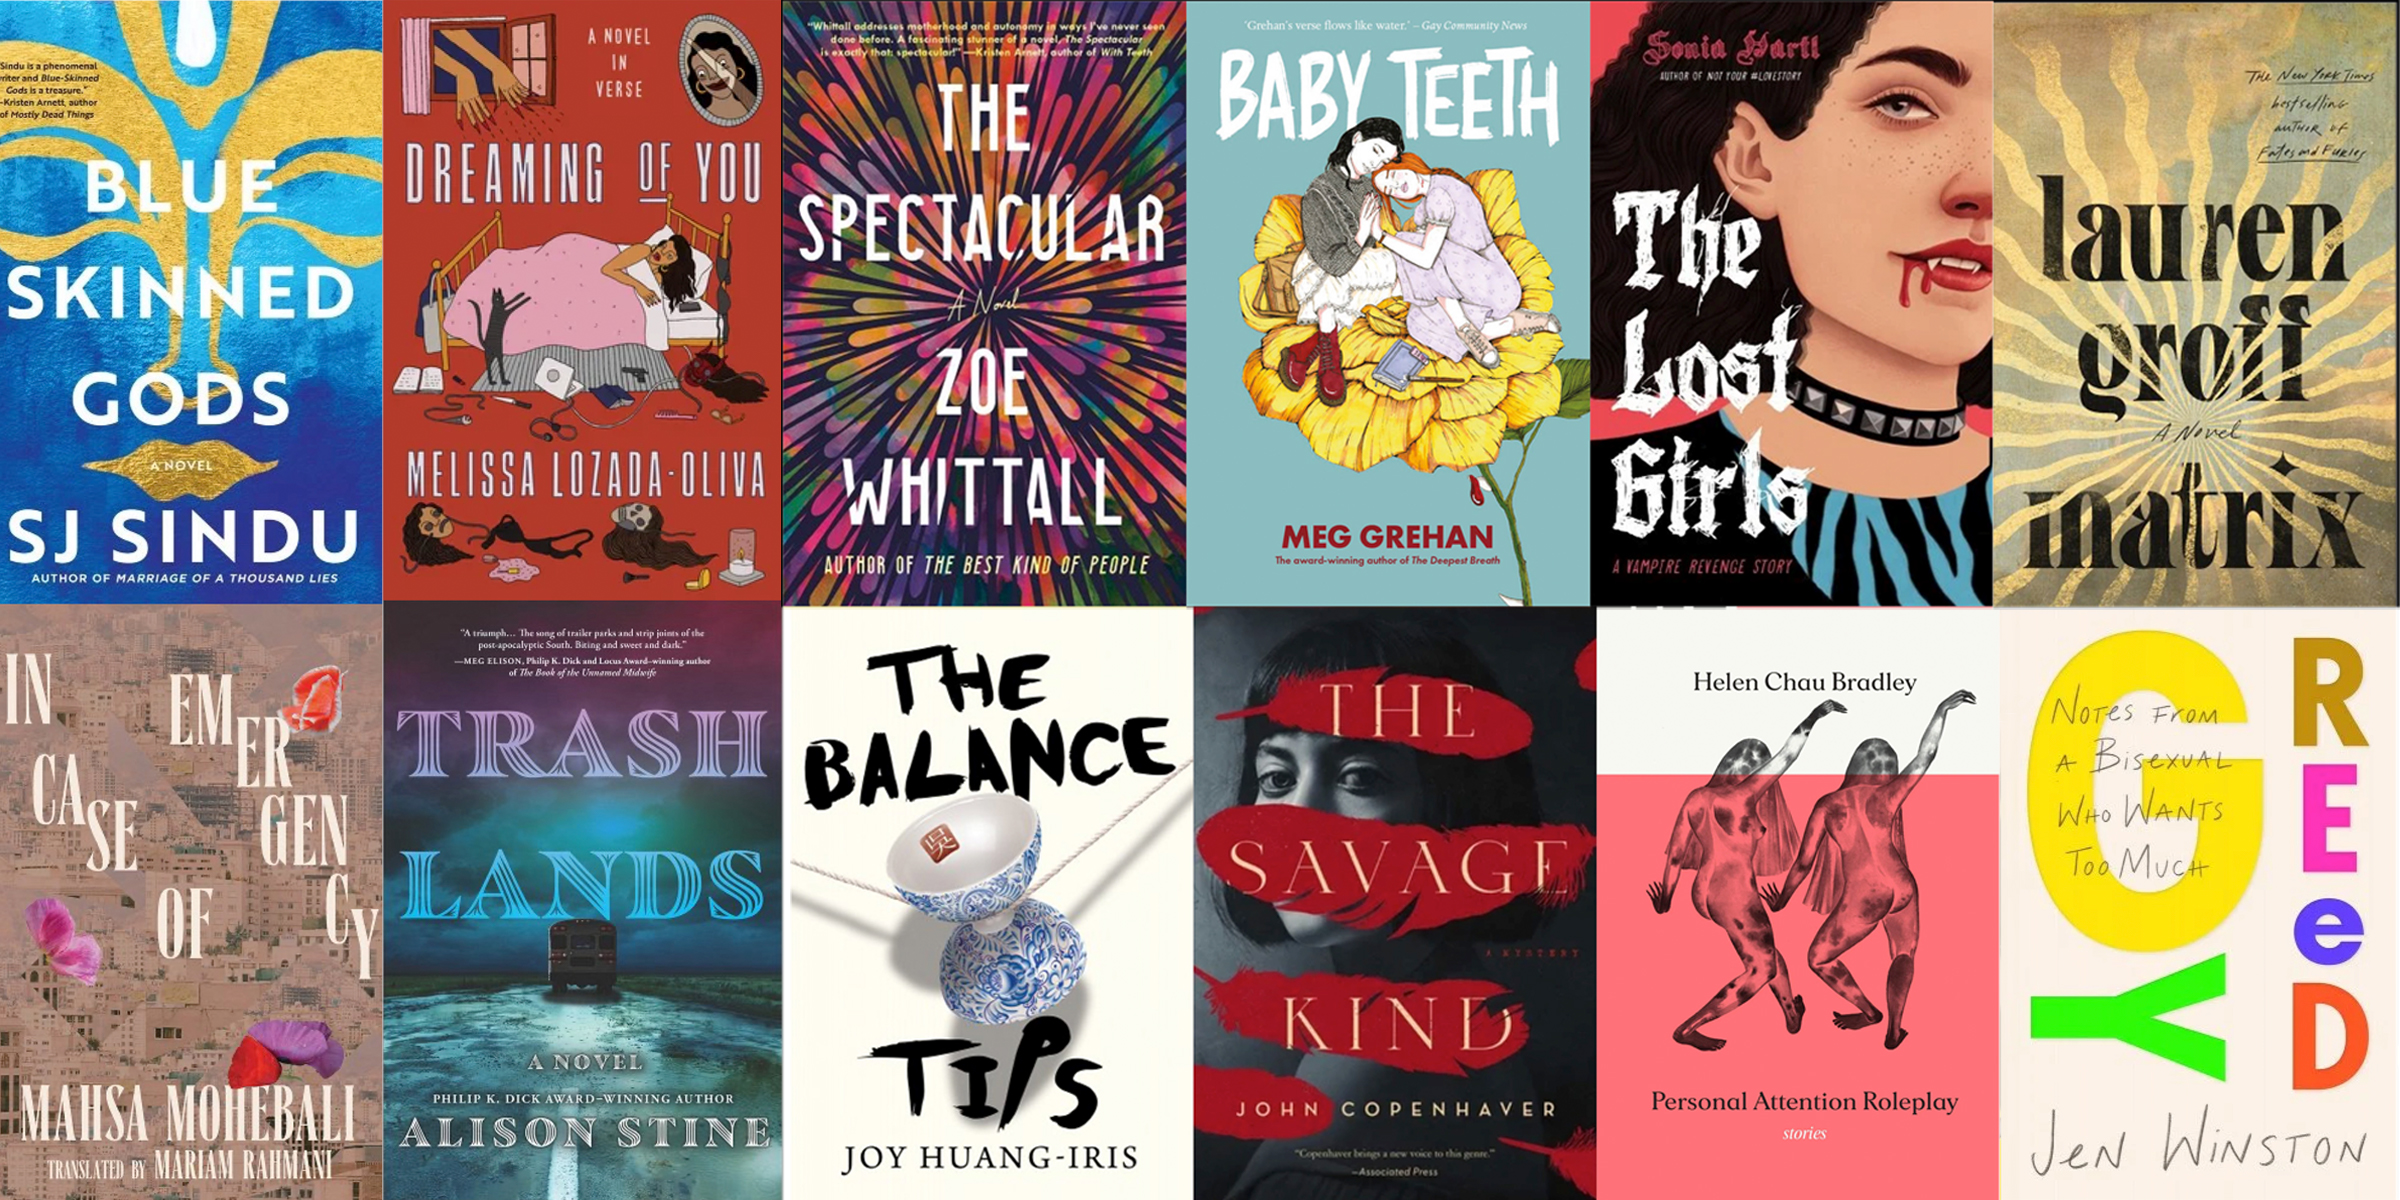 A grid of the covers of selected books featured in this post